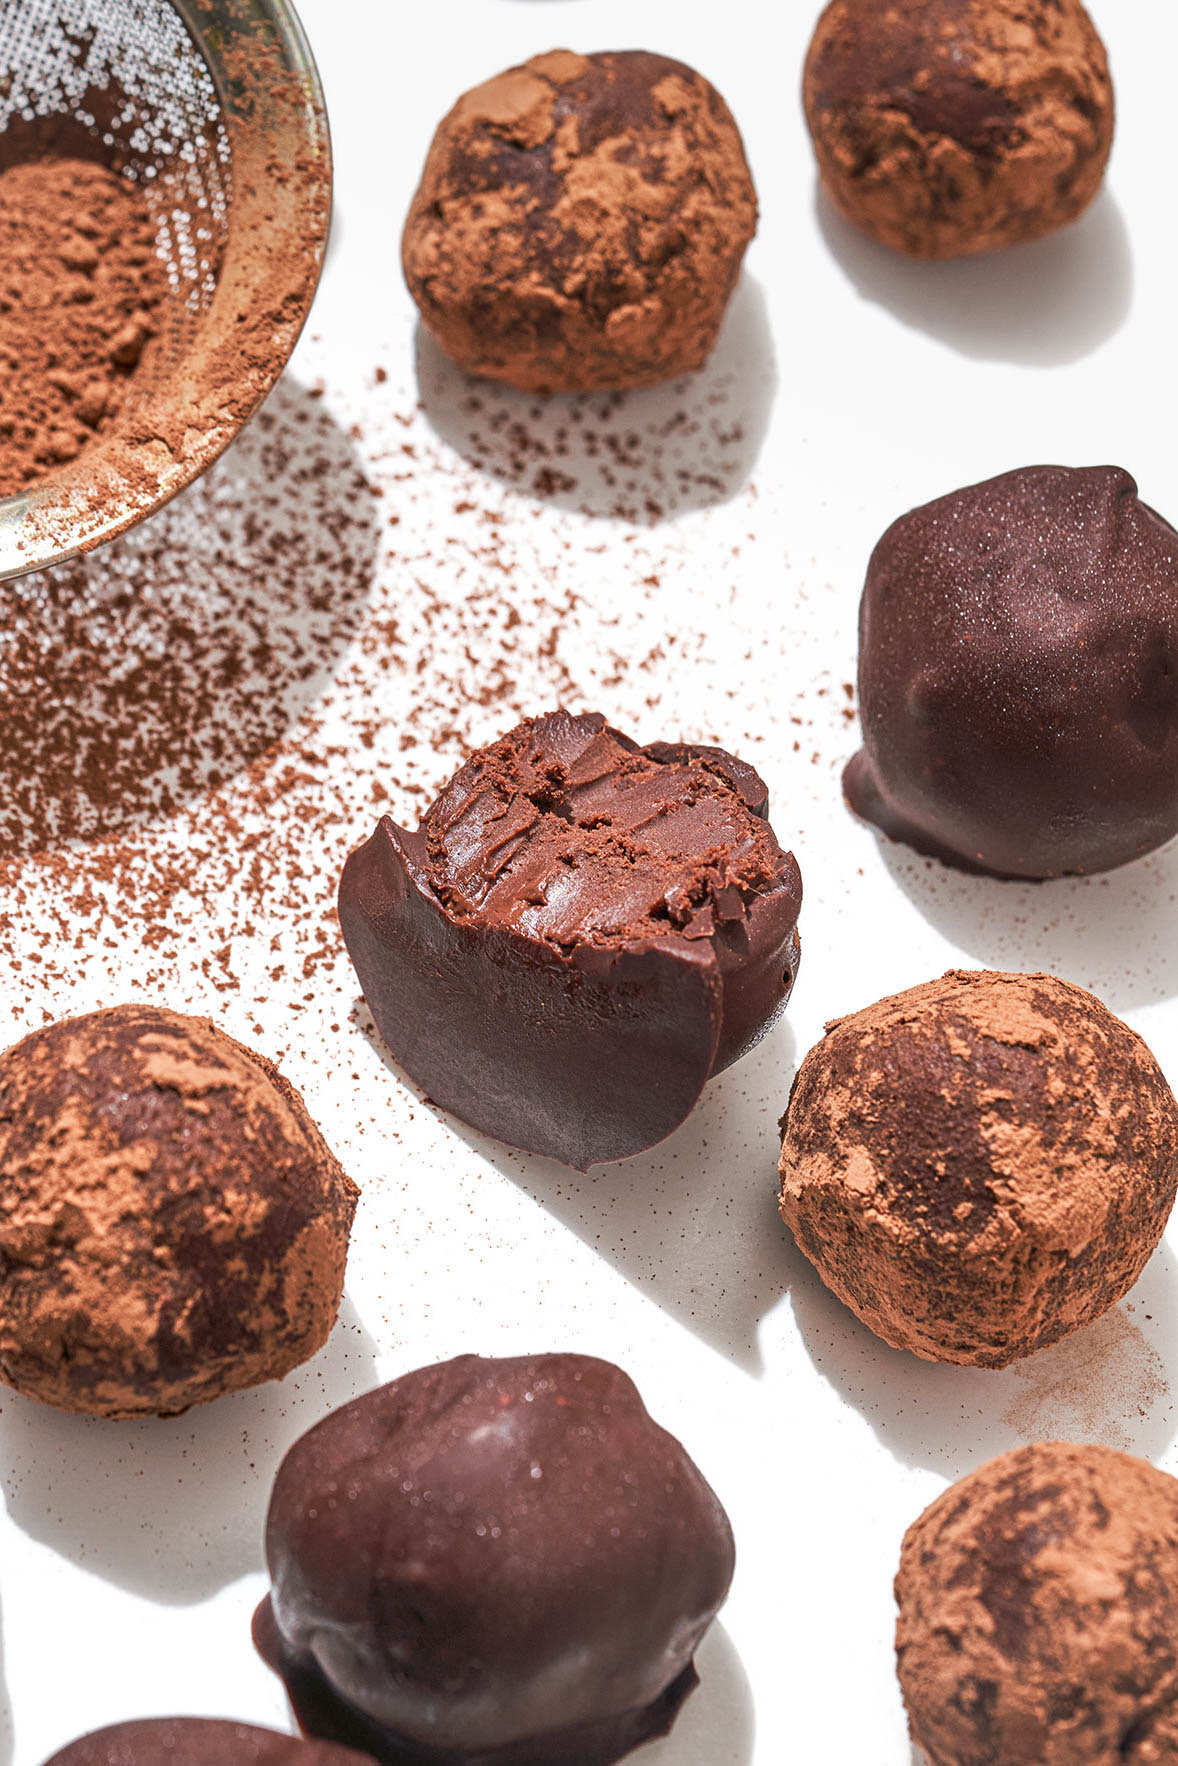 Several cocoa and chocolate coated truffles on a white surface.